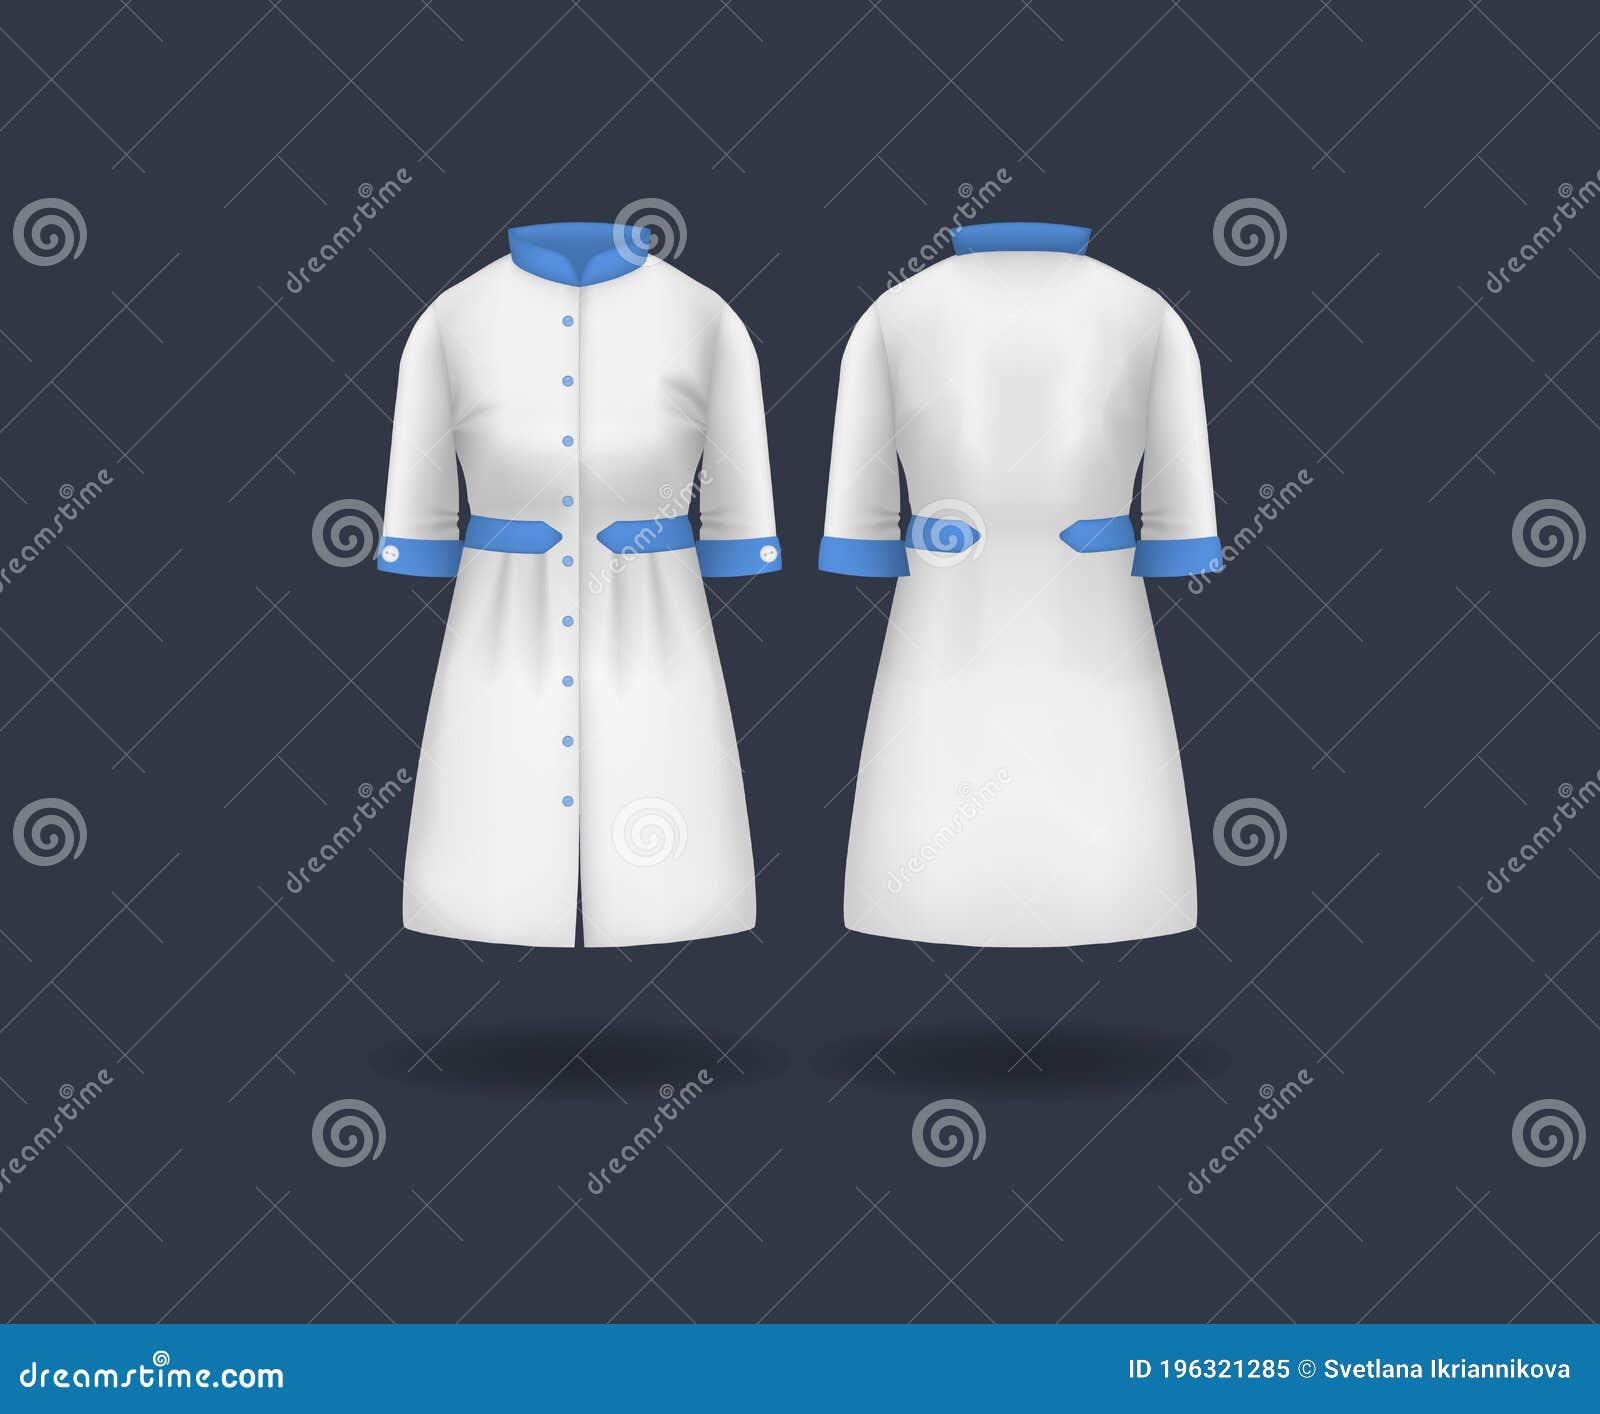 Download Realistic Doctor Coat Mock Up. Women`s Medical Gown, Lab Uniform, Doctor Medical Laboratory ...